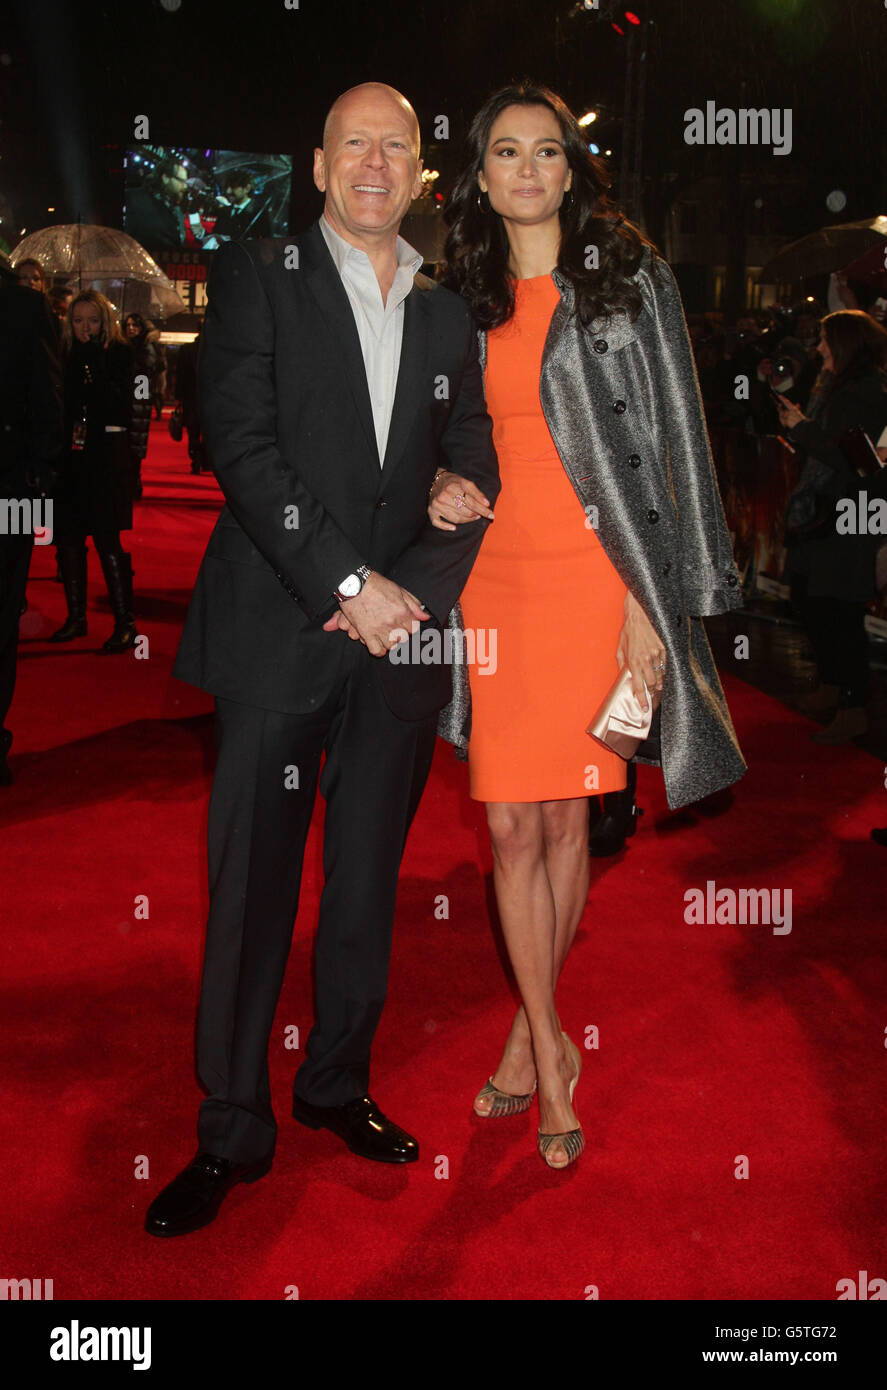 Bruce Willis and his wife Emma Heming arriving for the UK film premiere of A Good Day To Die Hard, at the Empire Leicester Square in central London. Stock Photo